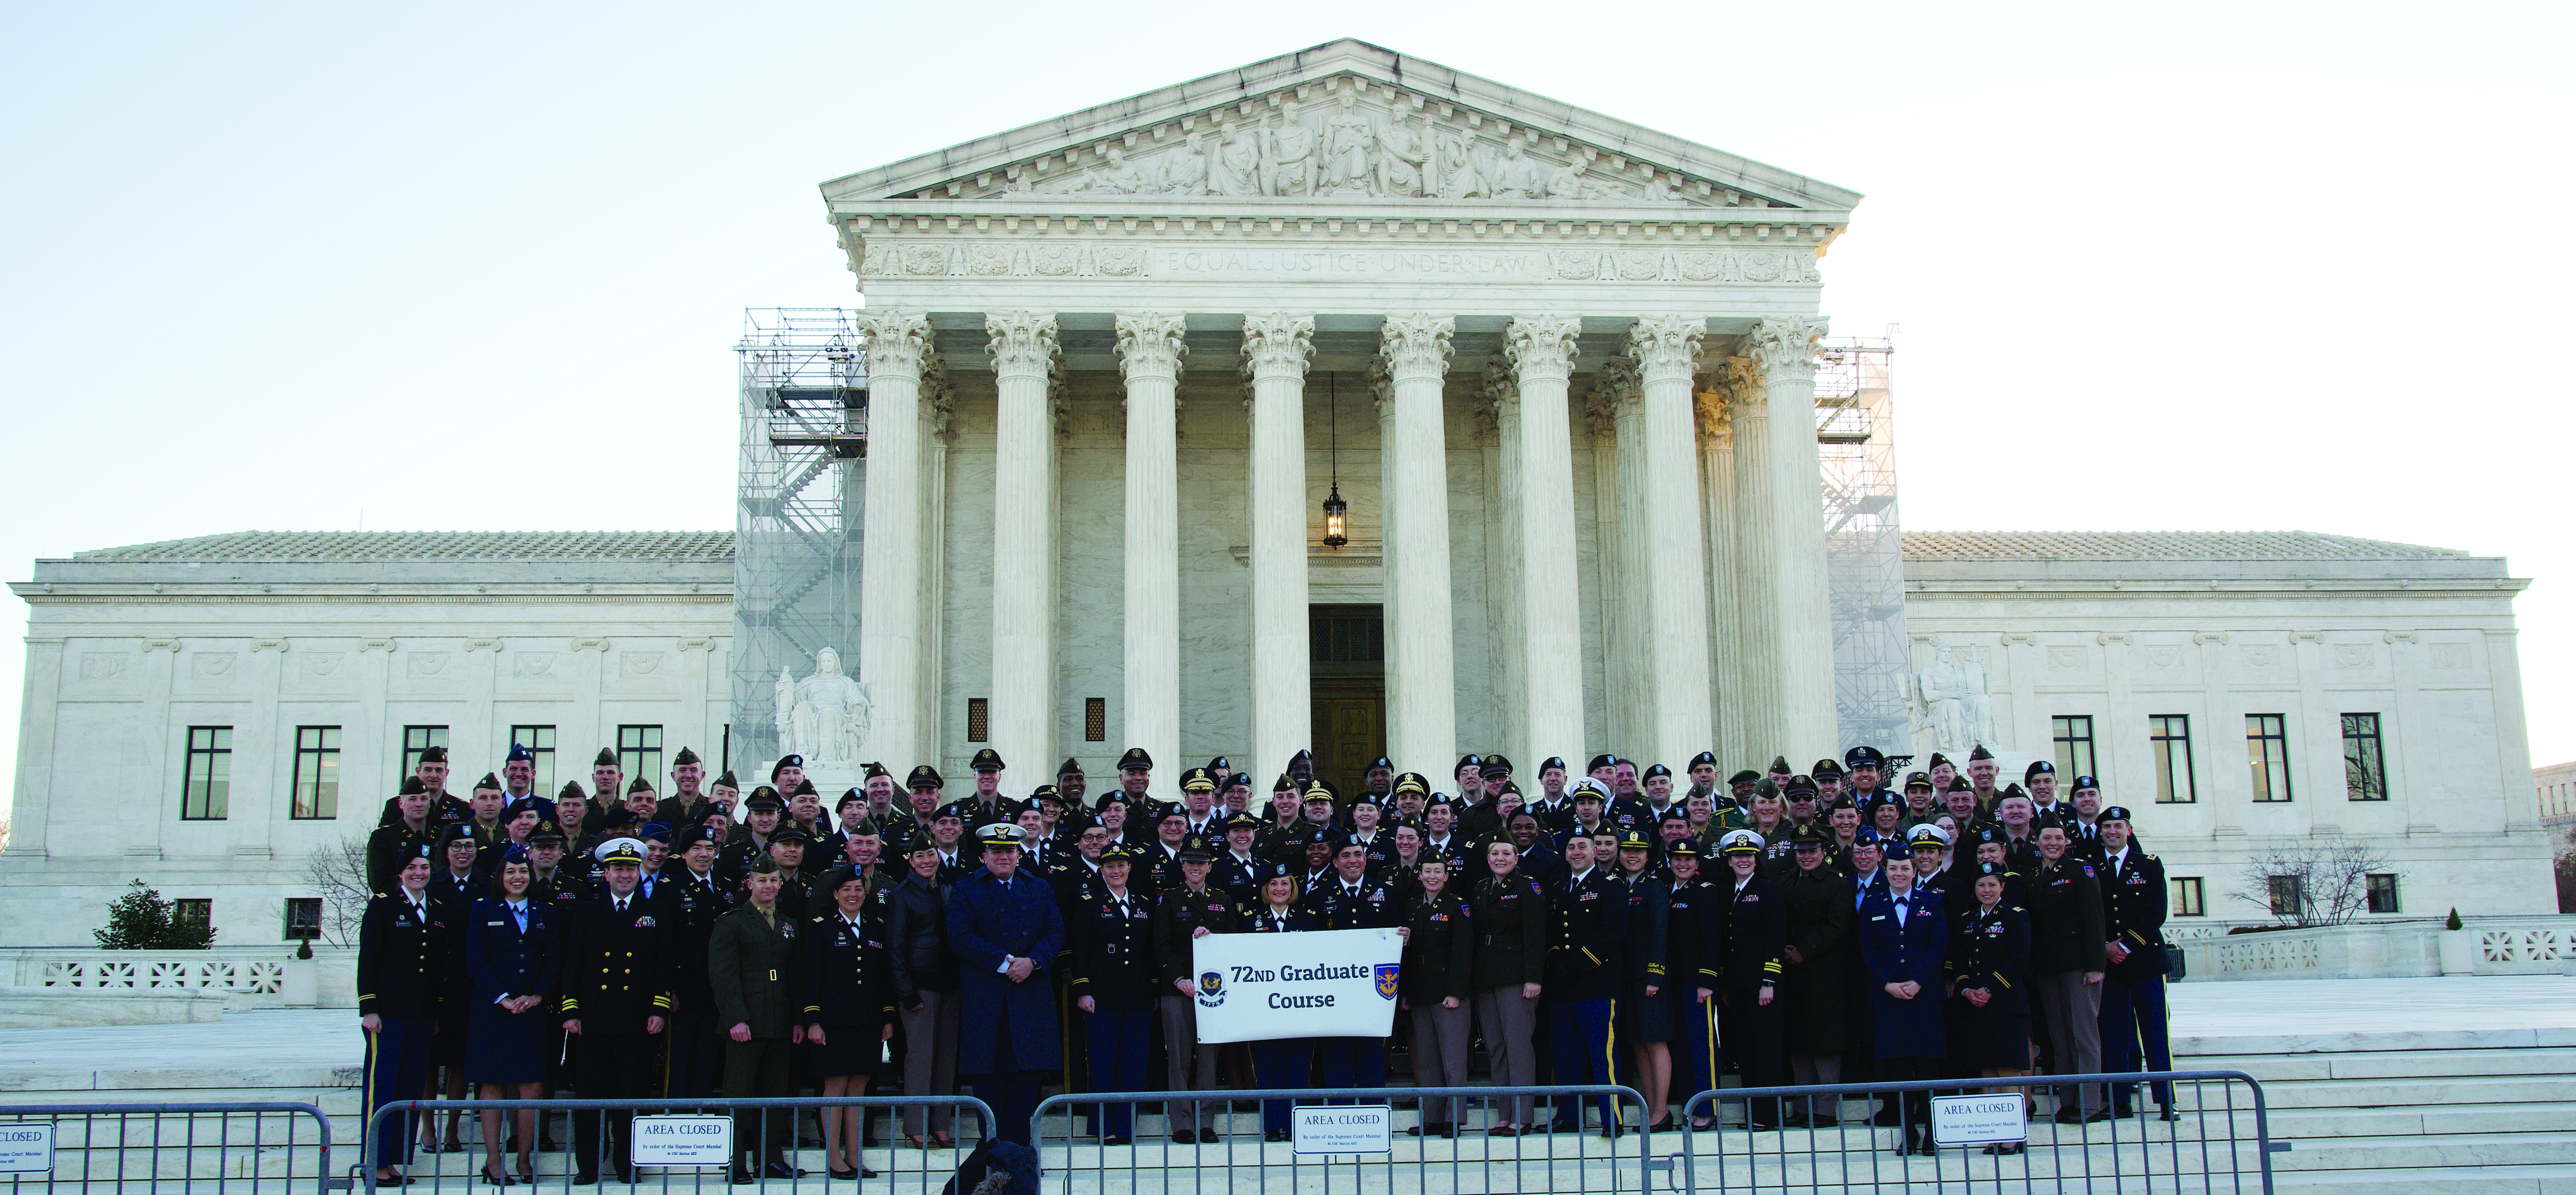 Students of the 72d Graduate Course pose before the Supreme Court building after their swearing in ceremony on 5 January 2024. (Credit: MAJ Johnathan L. Kopecky)